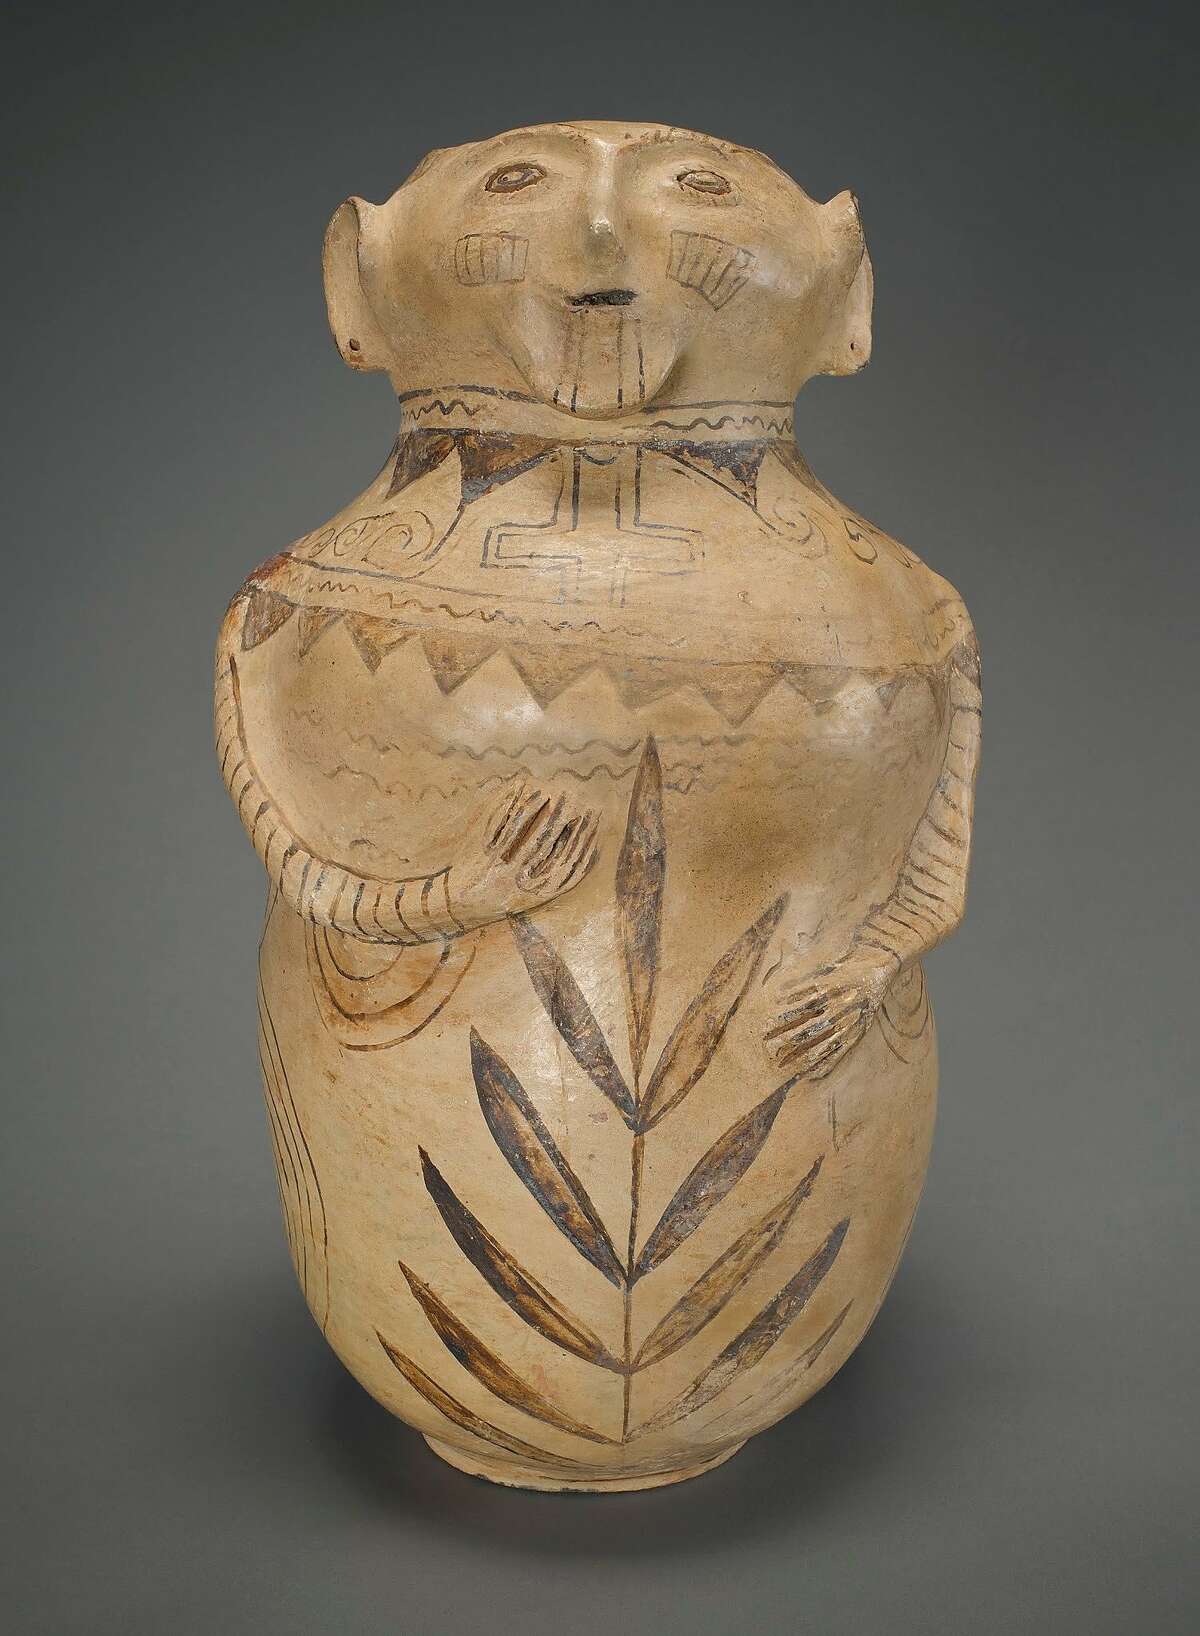 "Effigy vessel" (c. 1910) was part of the show “Lines on the Horizon: Native American Art From the Weisel Family Collection” from May 3, 2014, to Jan. 4, 2015.